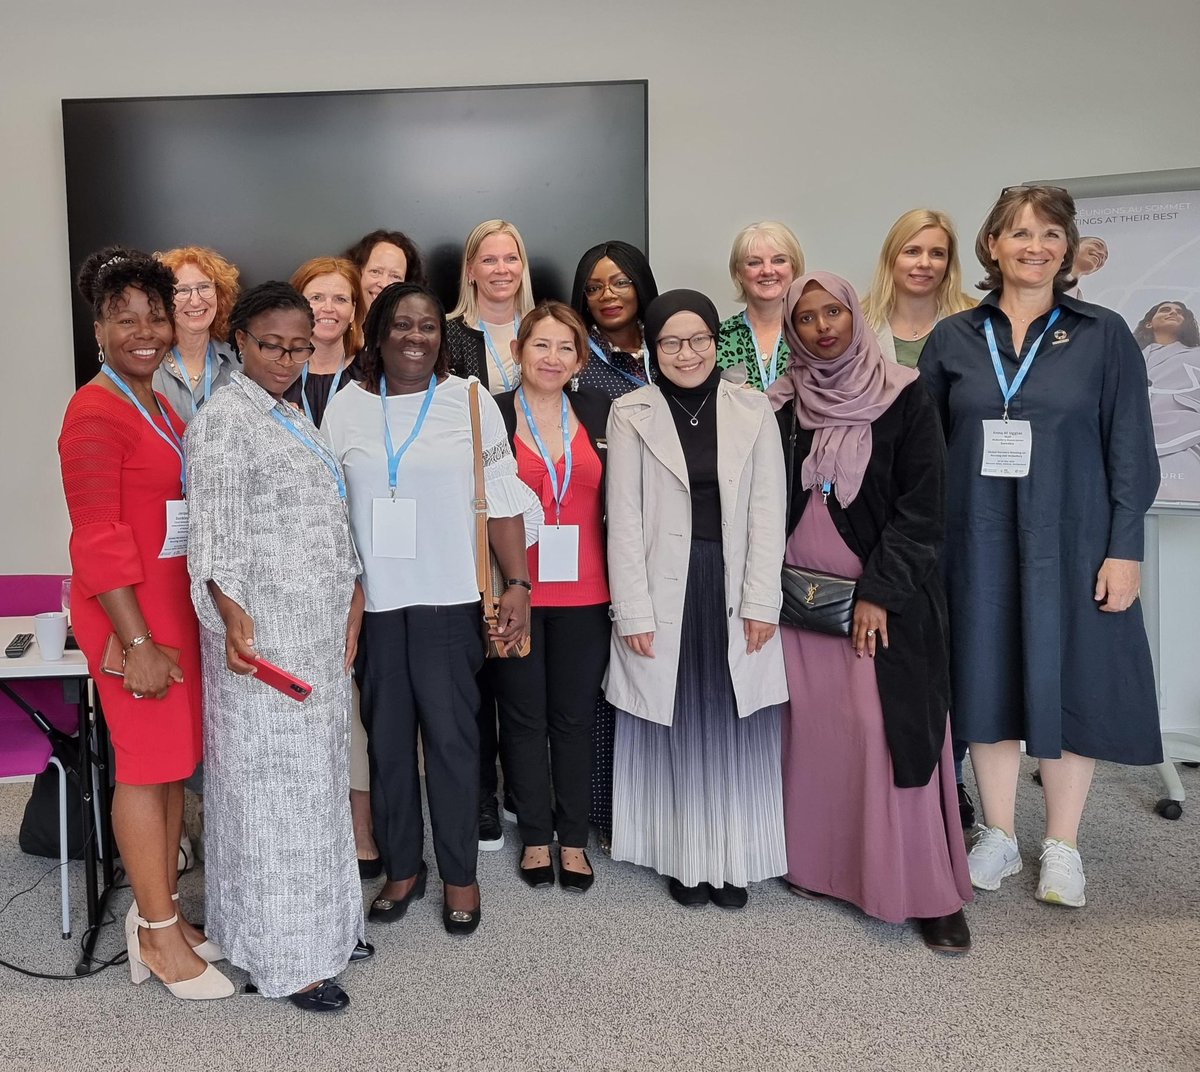 Solidarity of Midwives at the Global Parters Meeting on Nursing and Midwifery in Geneva ⭐️ Great start to the day meeting with all the midwives present, always a pleasure to share insights from around the world! @who @dunkleybent @TorresOyarzo